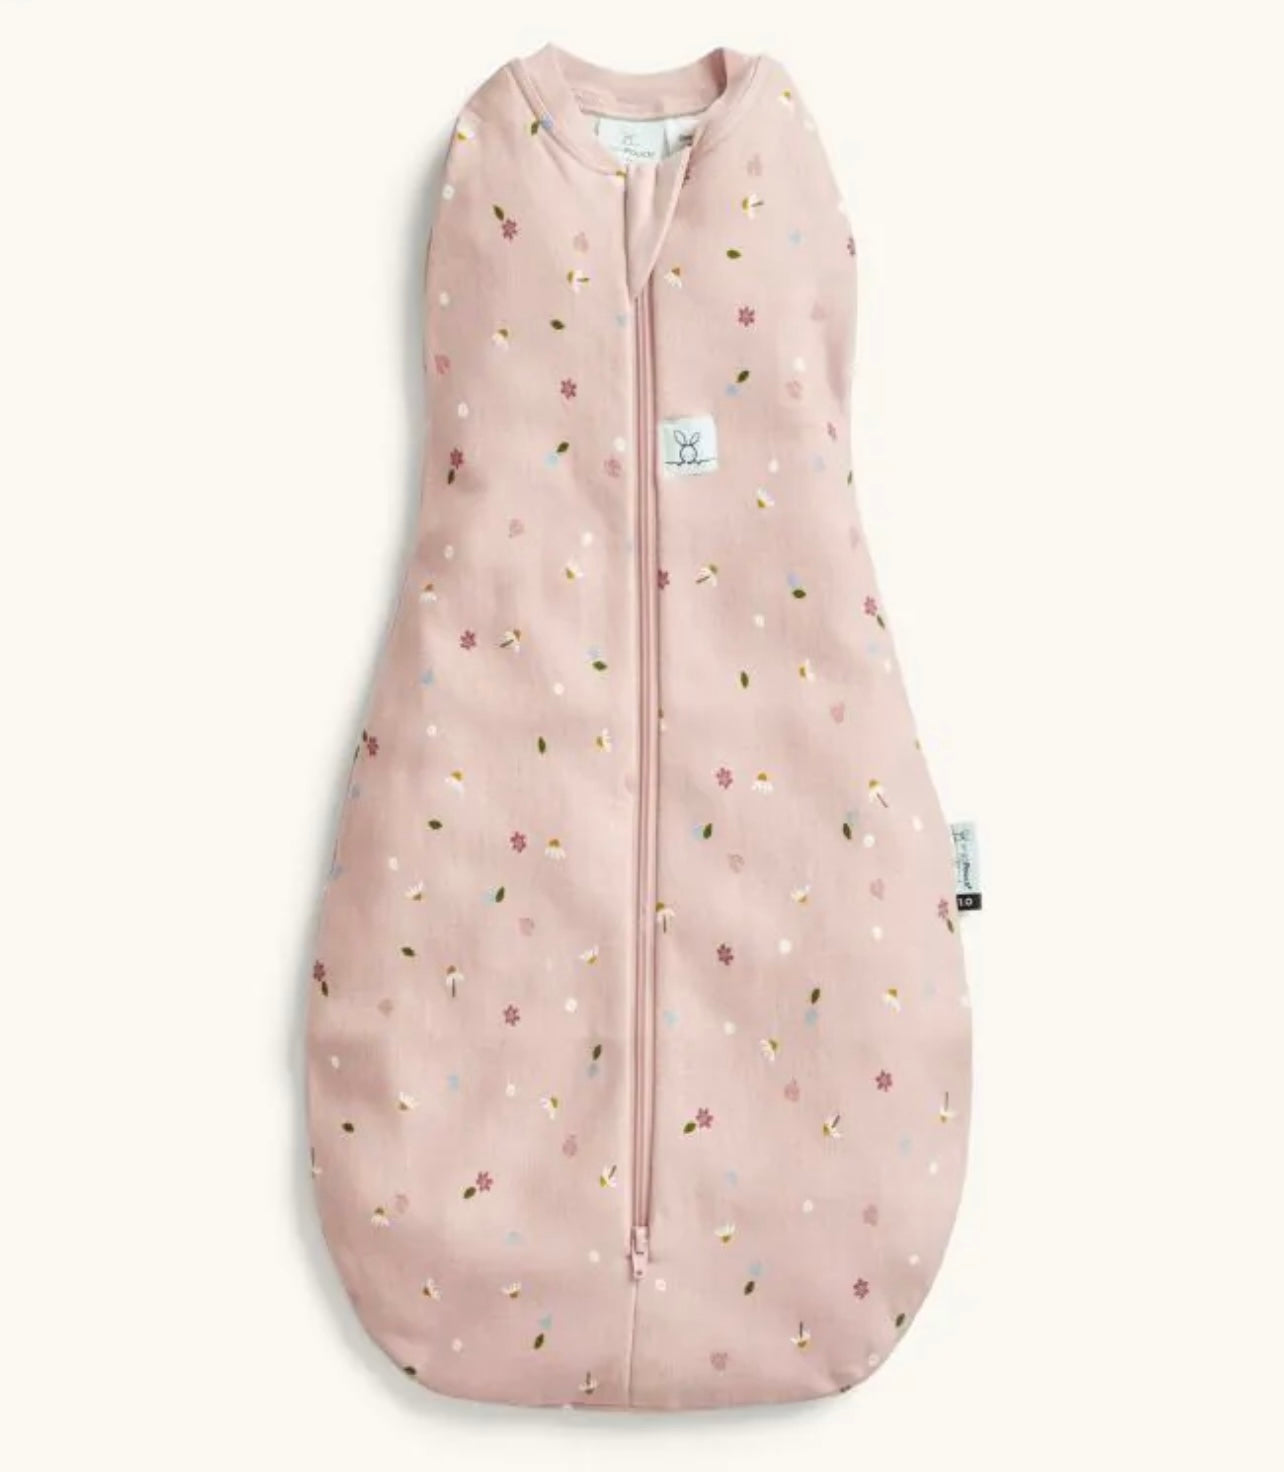 Cocoon Swaddle Bag 1.0 TOG - Daisies